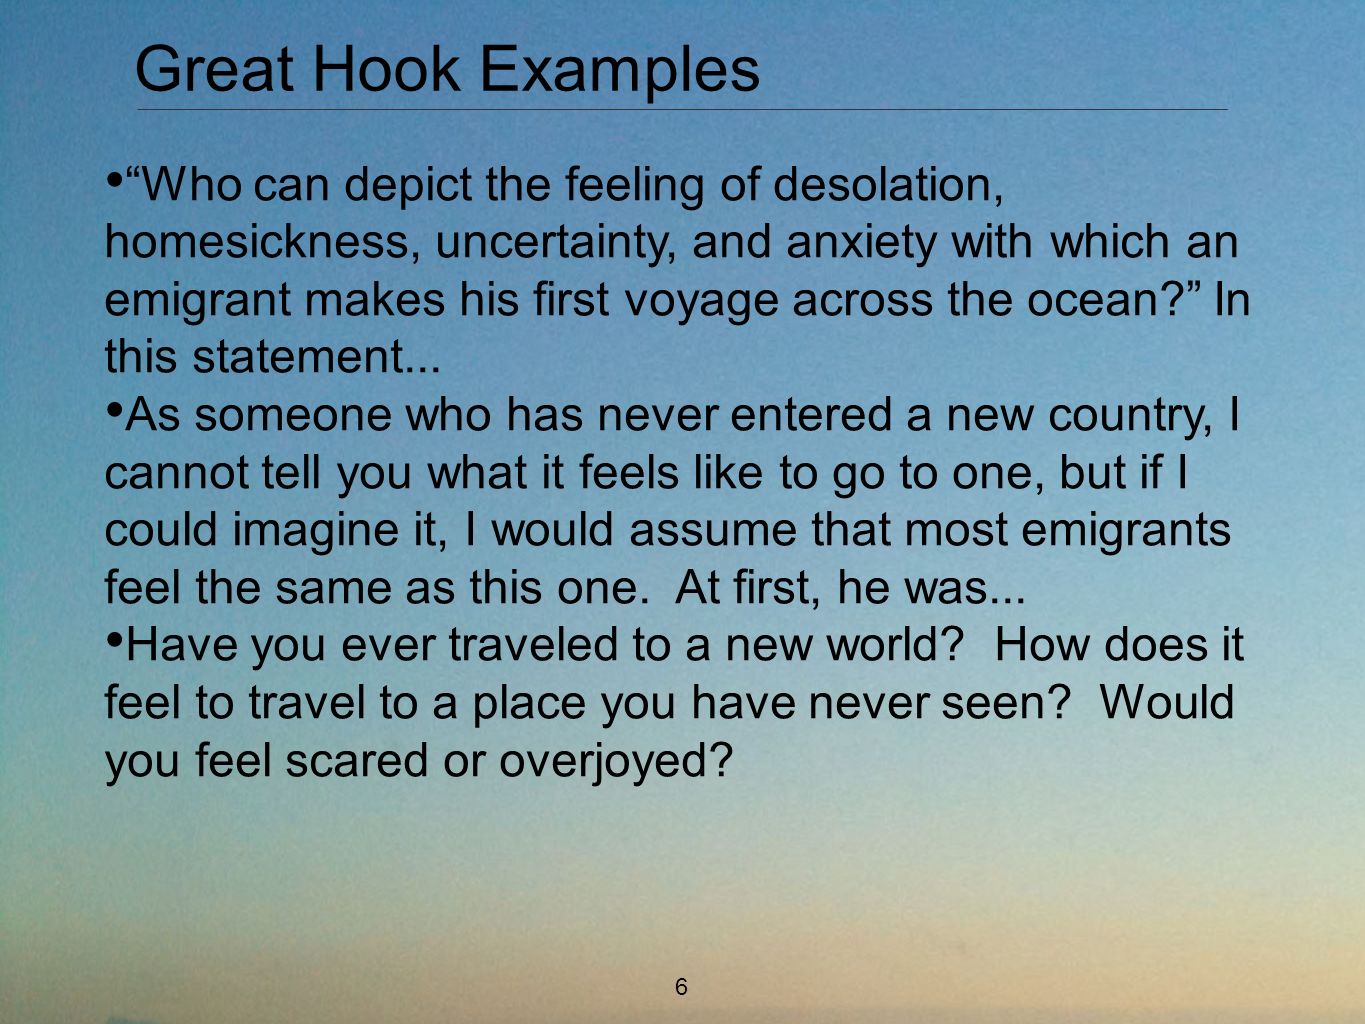 Great Hook Examples 6 Who can depict the feeling of desolation, homesickness, uncertainty, and anxiety with which an emigrant makes his first voyage across the ocean In this statement...